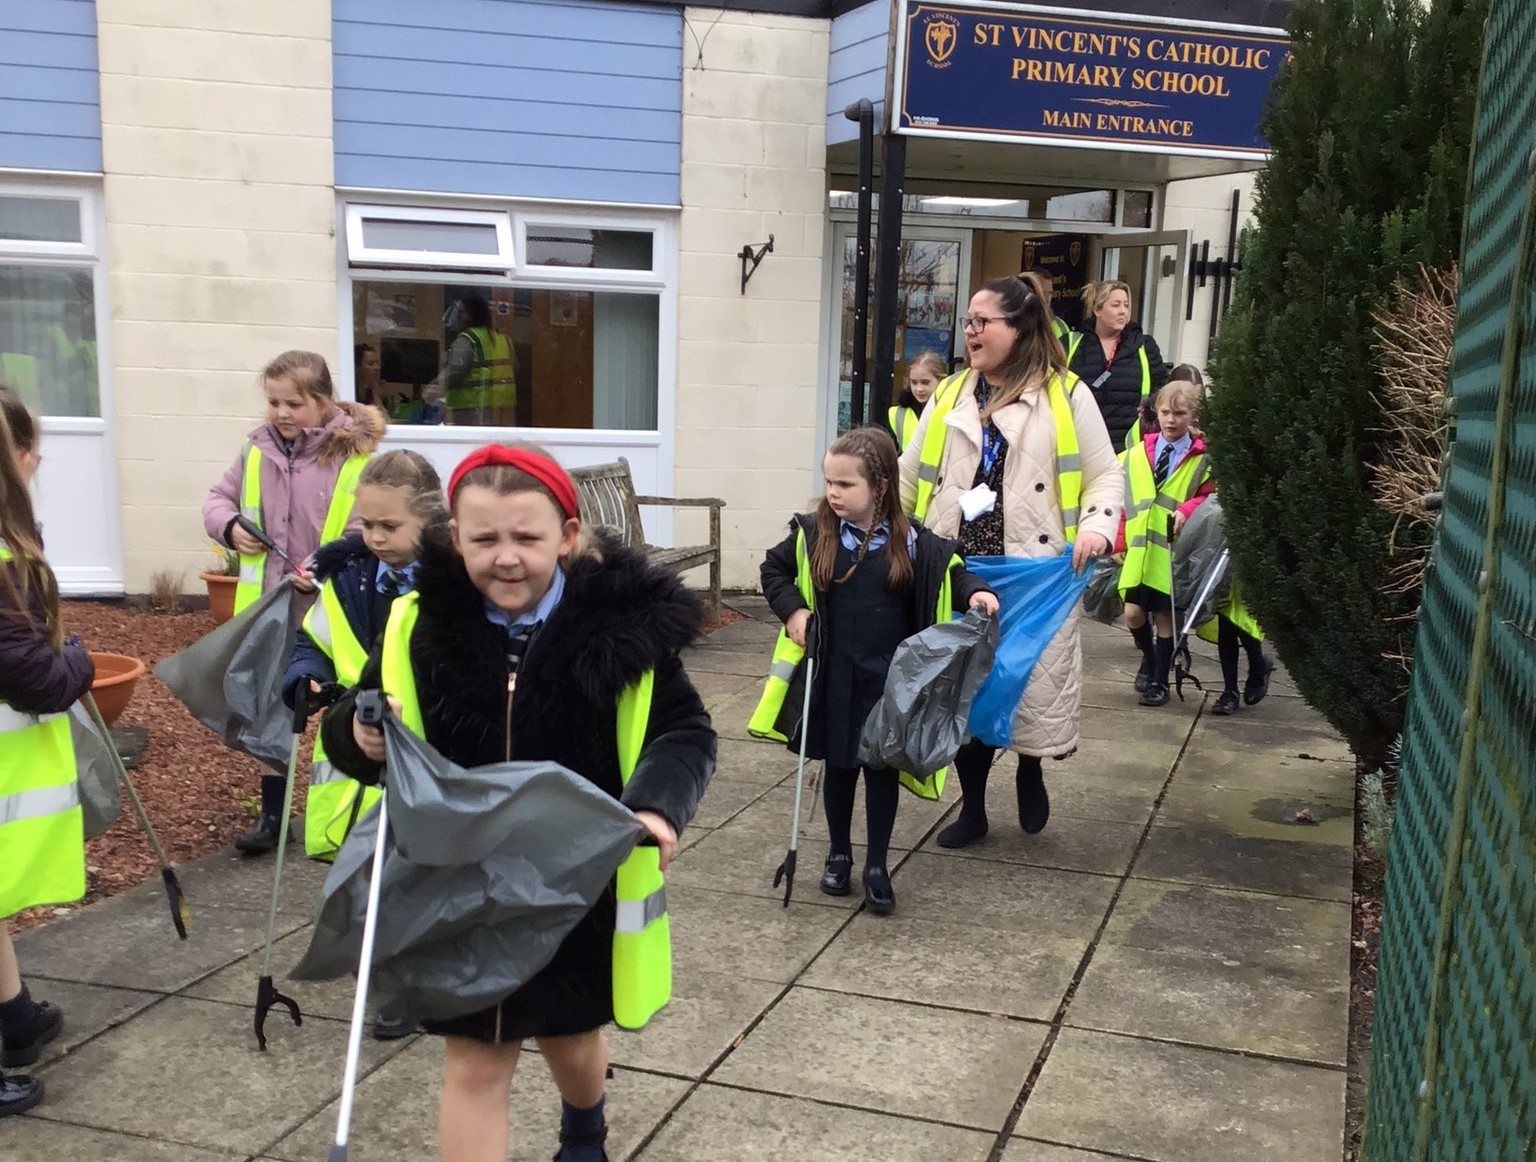 Children litter picking in the local area